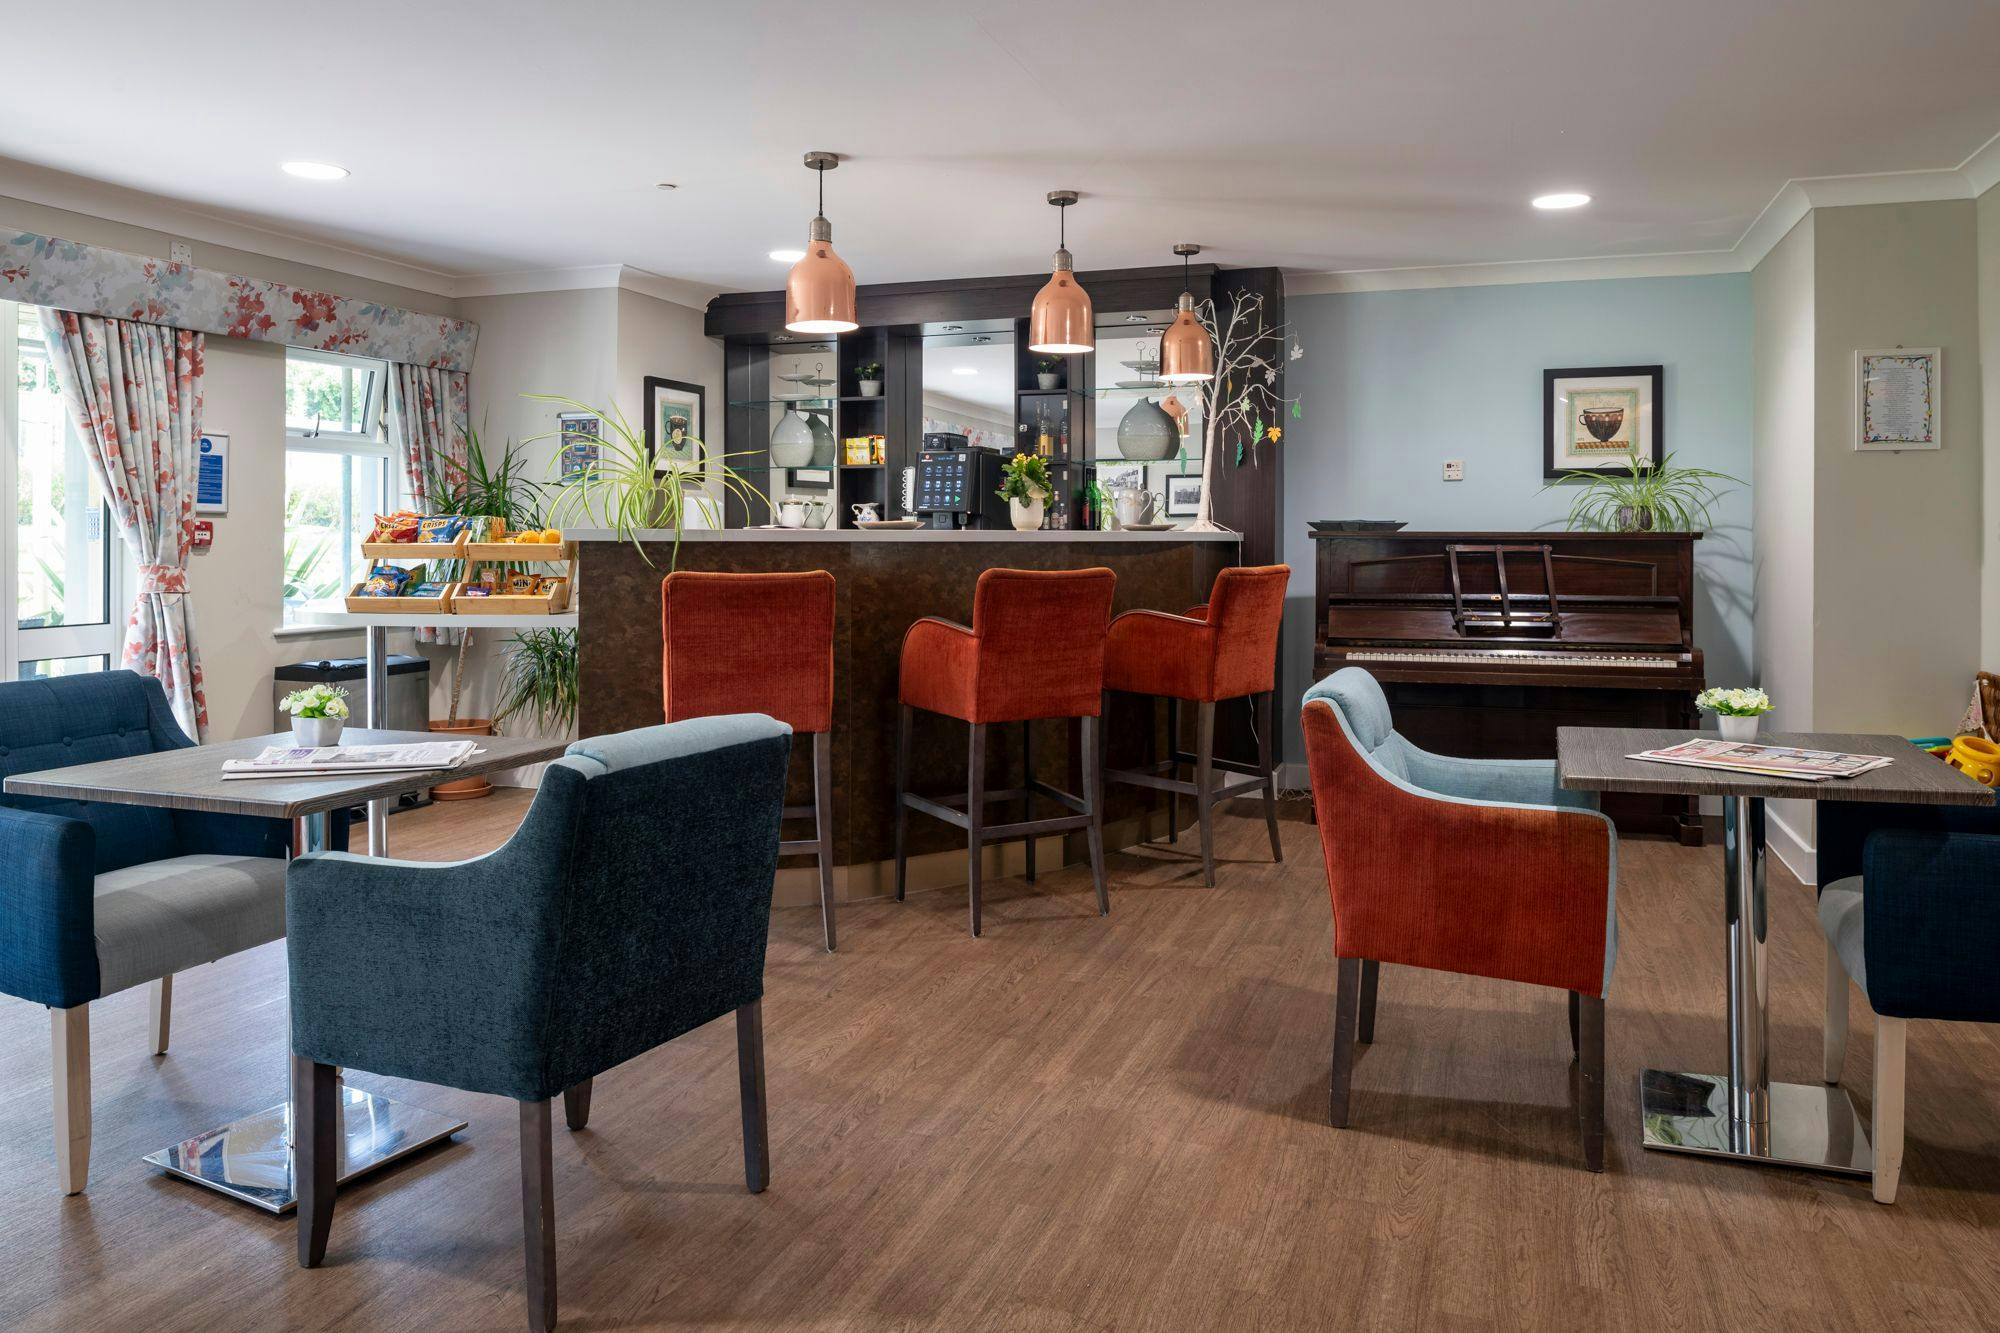 Communal area at Grace Care Home in Thornbury, South Gloucestershire